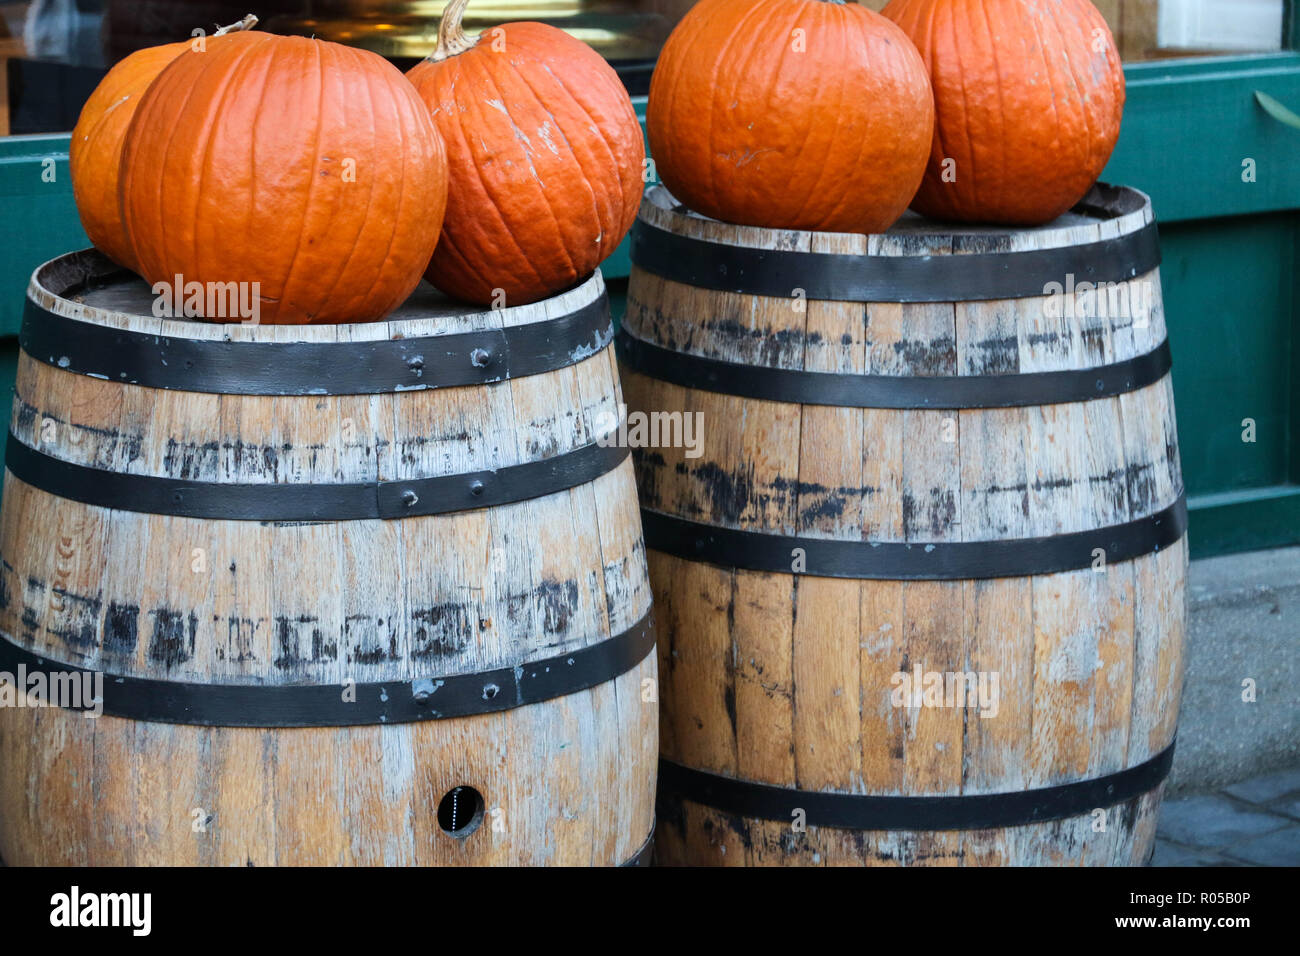 Barrels and orange pumpkins infront of the Cafe Var at Buda Castle. Budapest, Hungary. Stock Photo